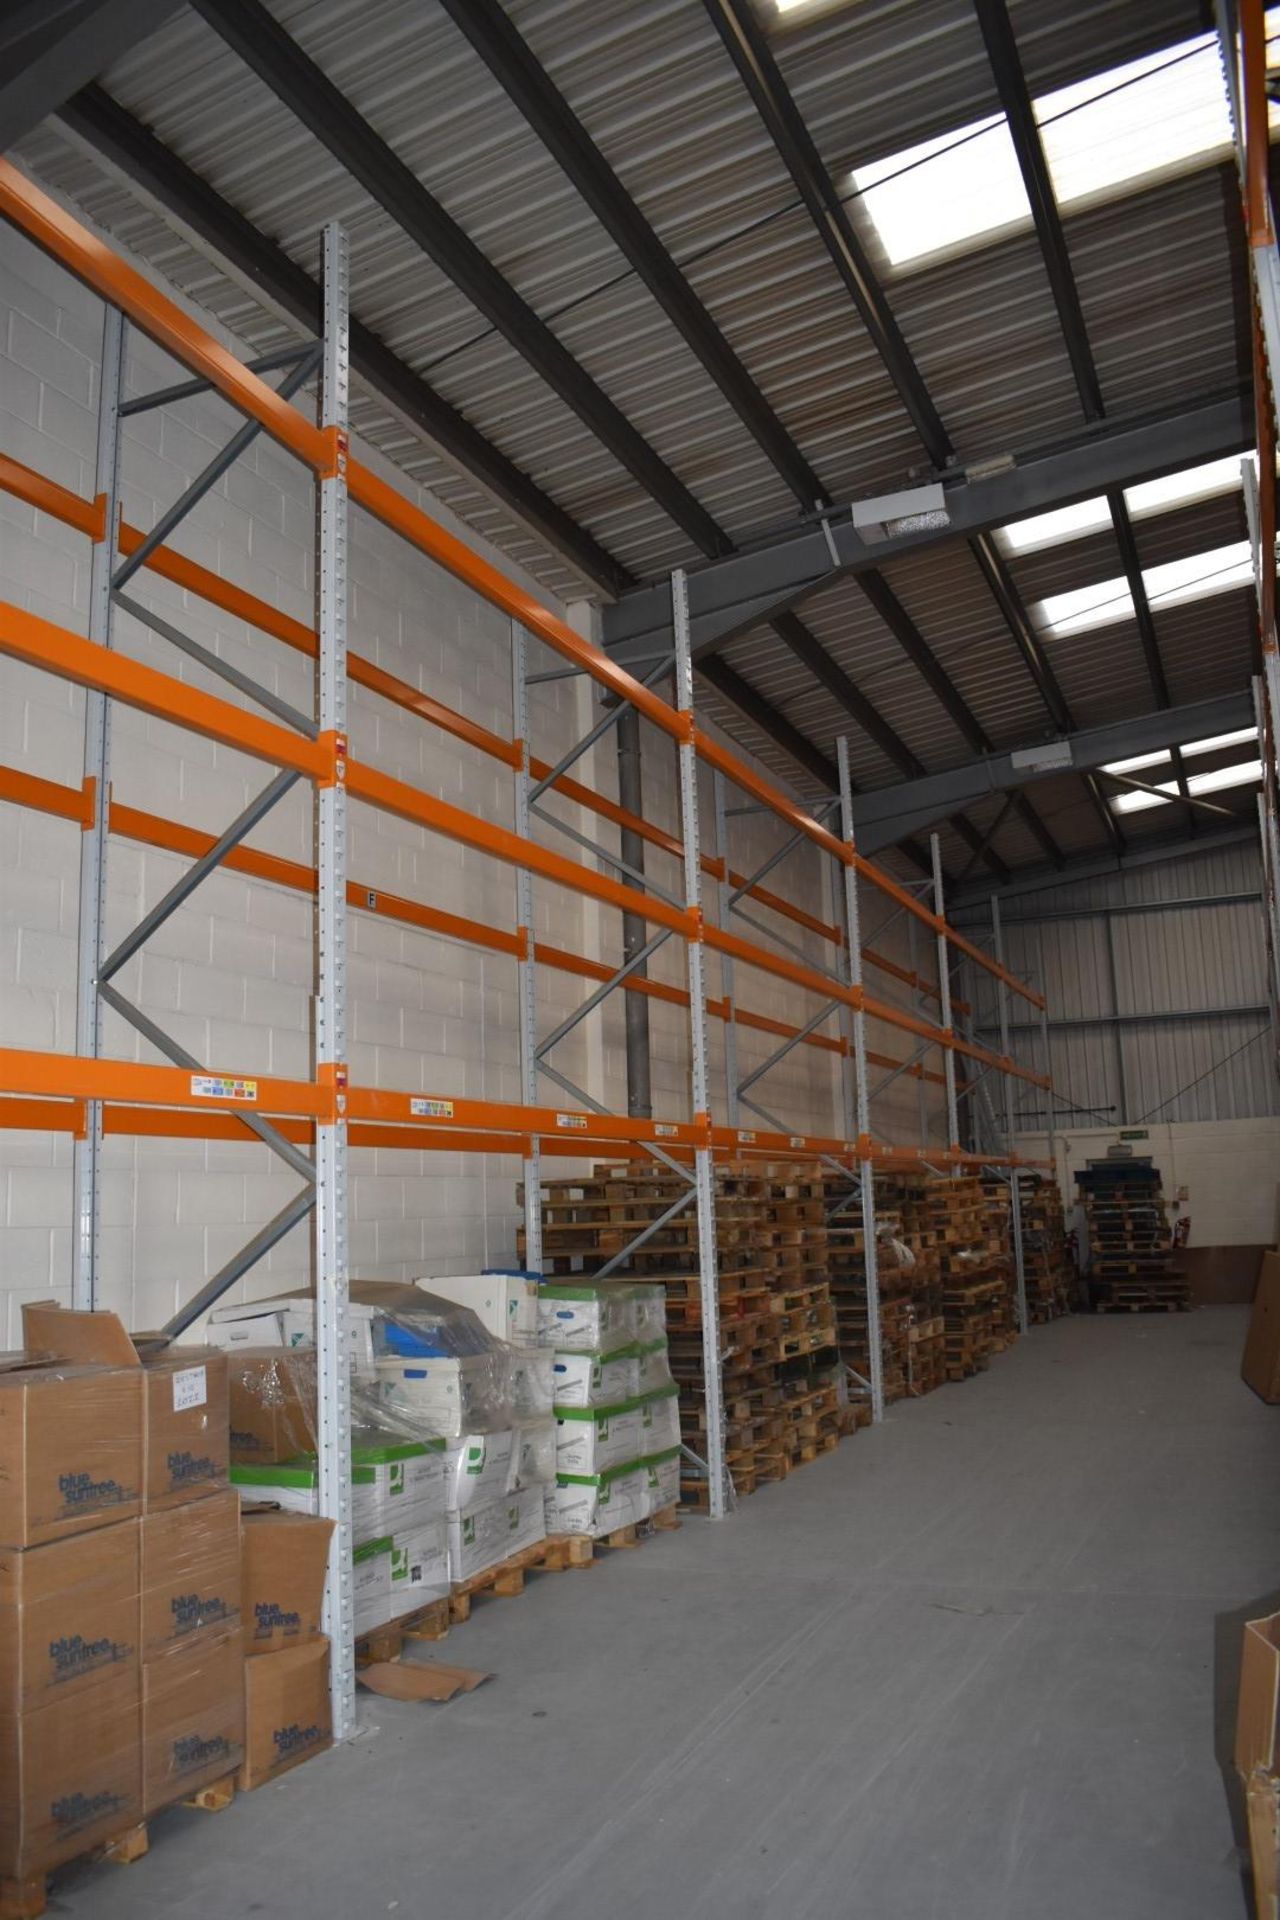 9 x Bays of Apex Pallet Racking - Includes 10 x Apex 16 UK 16,000kg Capacity Uprights and 60 x - Image 12 of 19